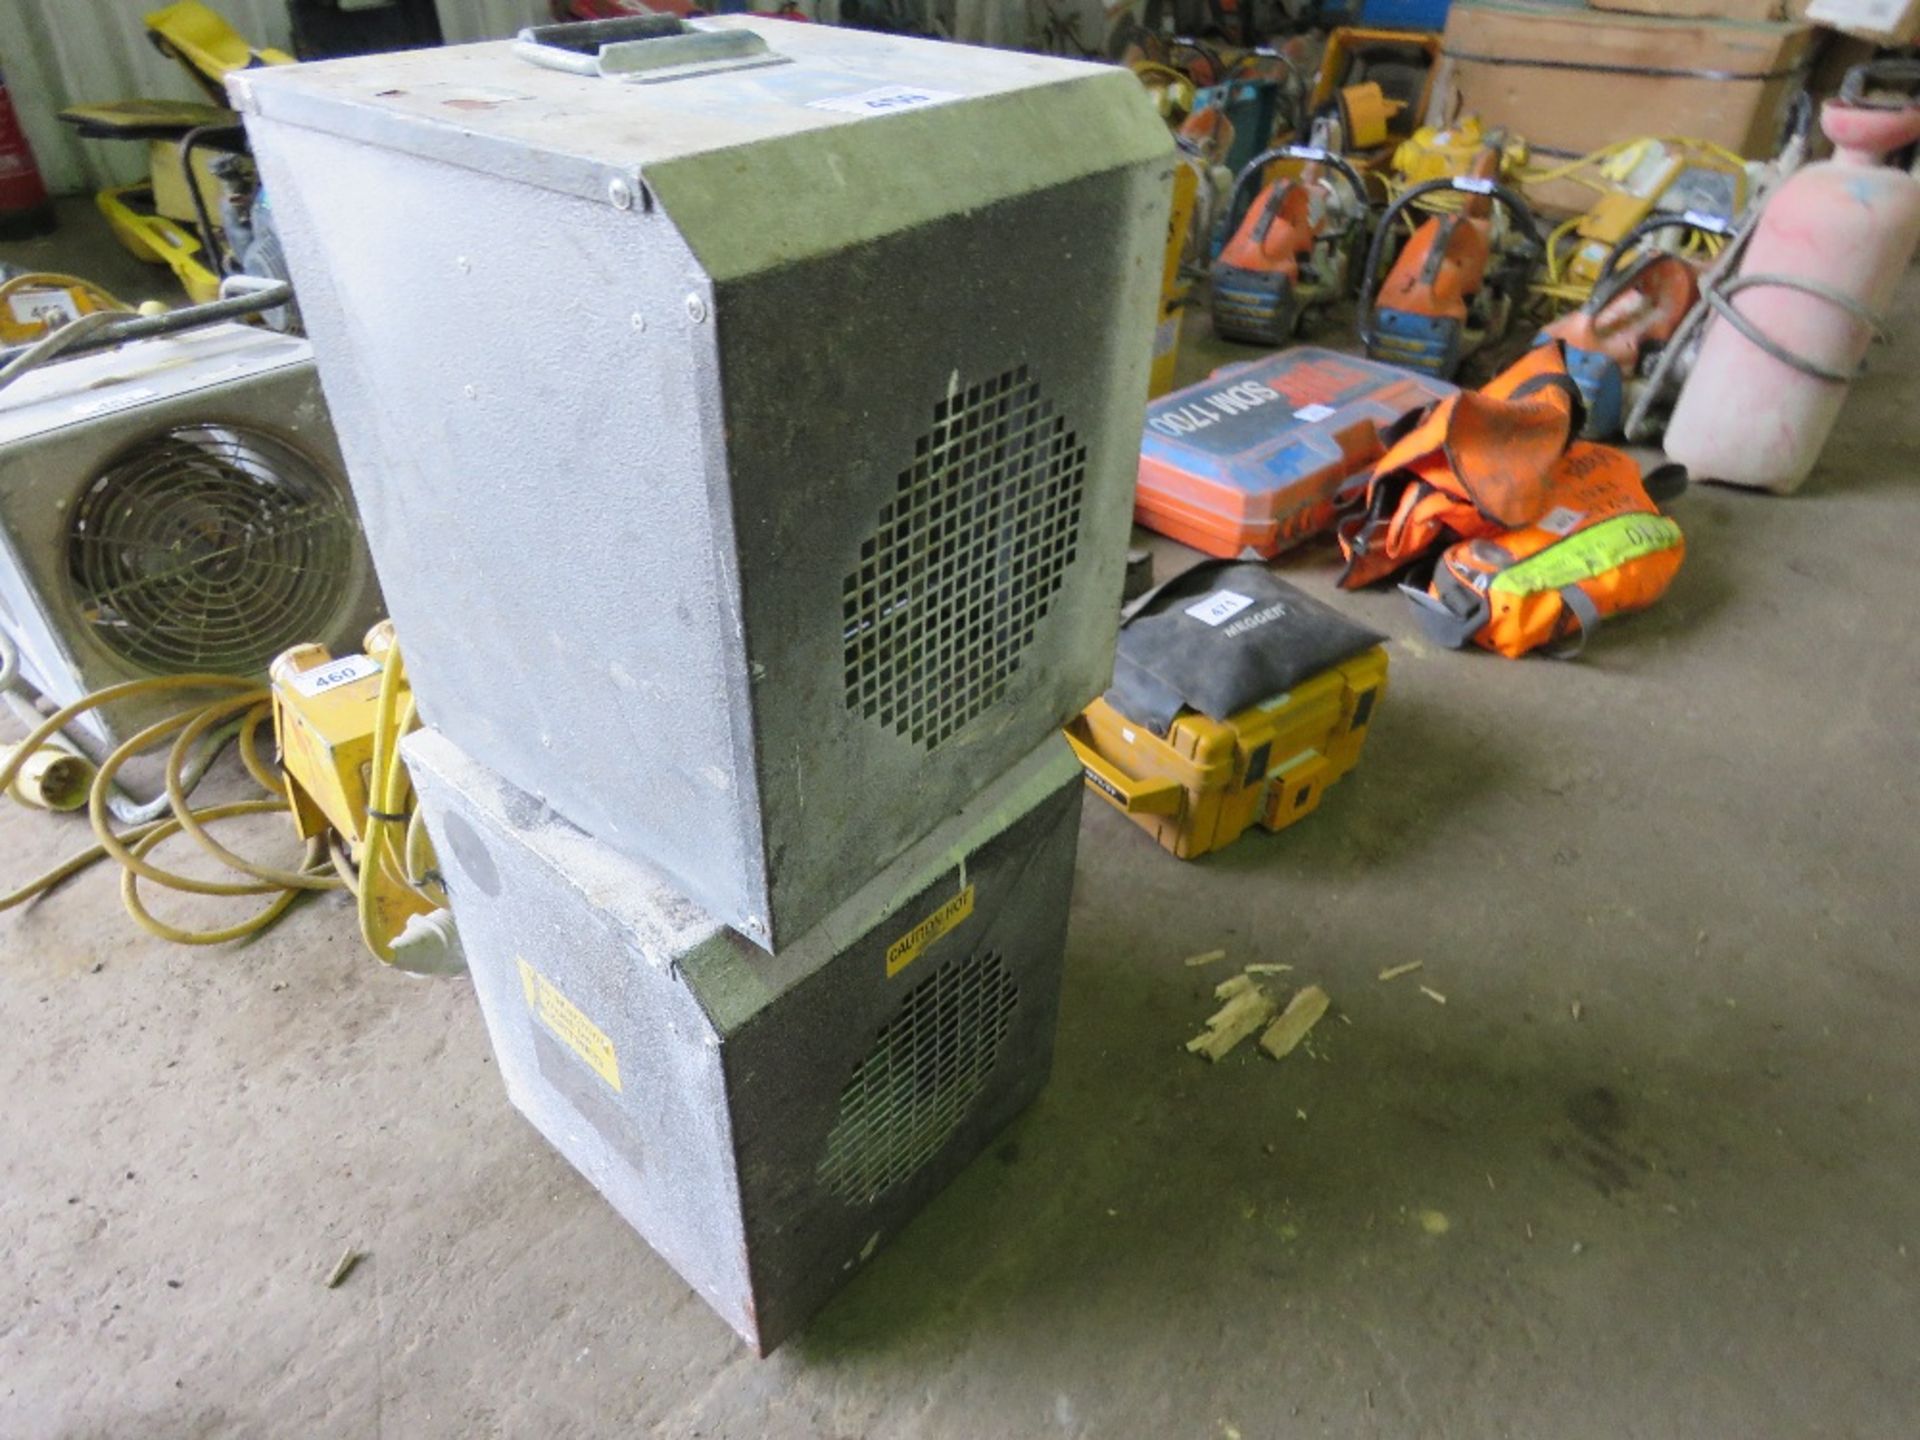 2 X 110VOLT CUBE HEATERS. DIRECT FROM A LOCAL GROUNDWORKS COMPANY AS PART OF THEIR RESTRUCTURING